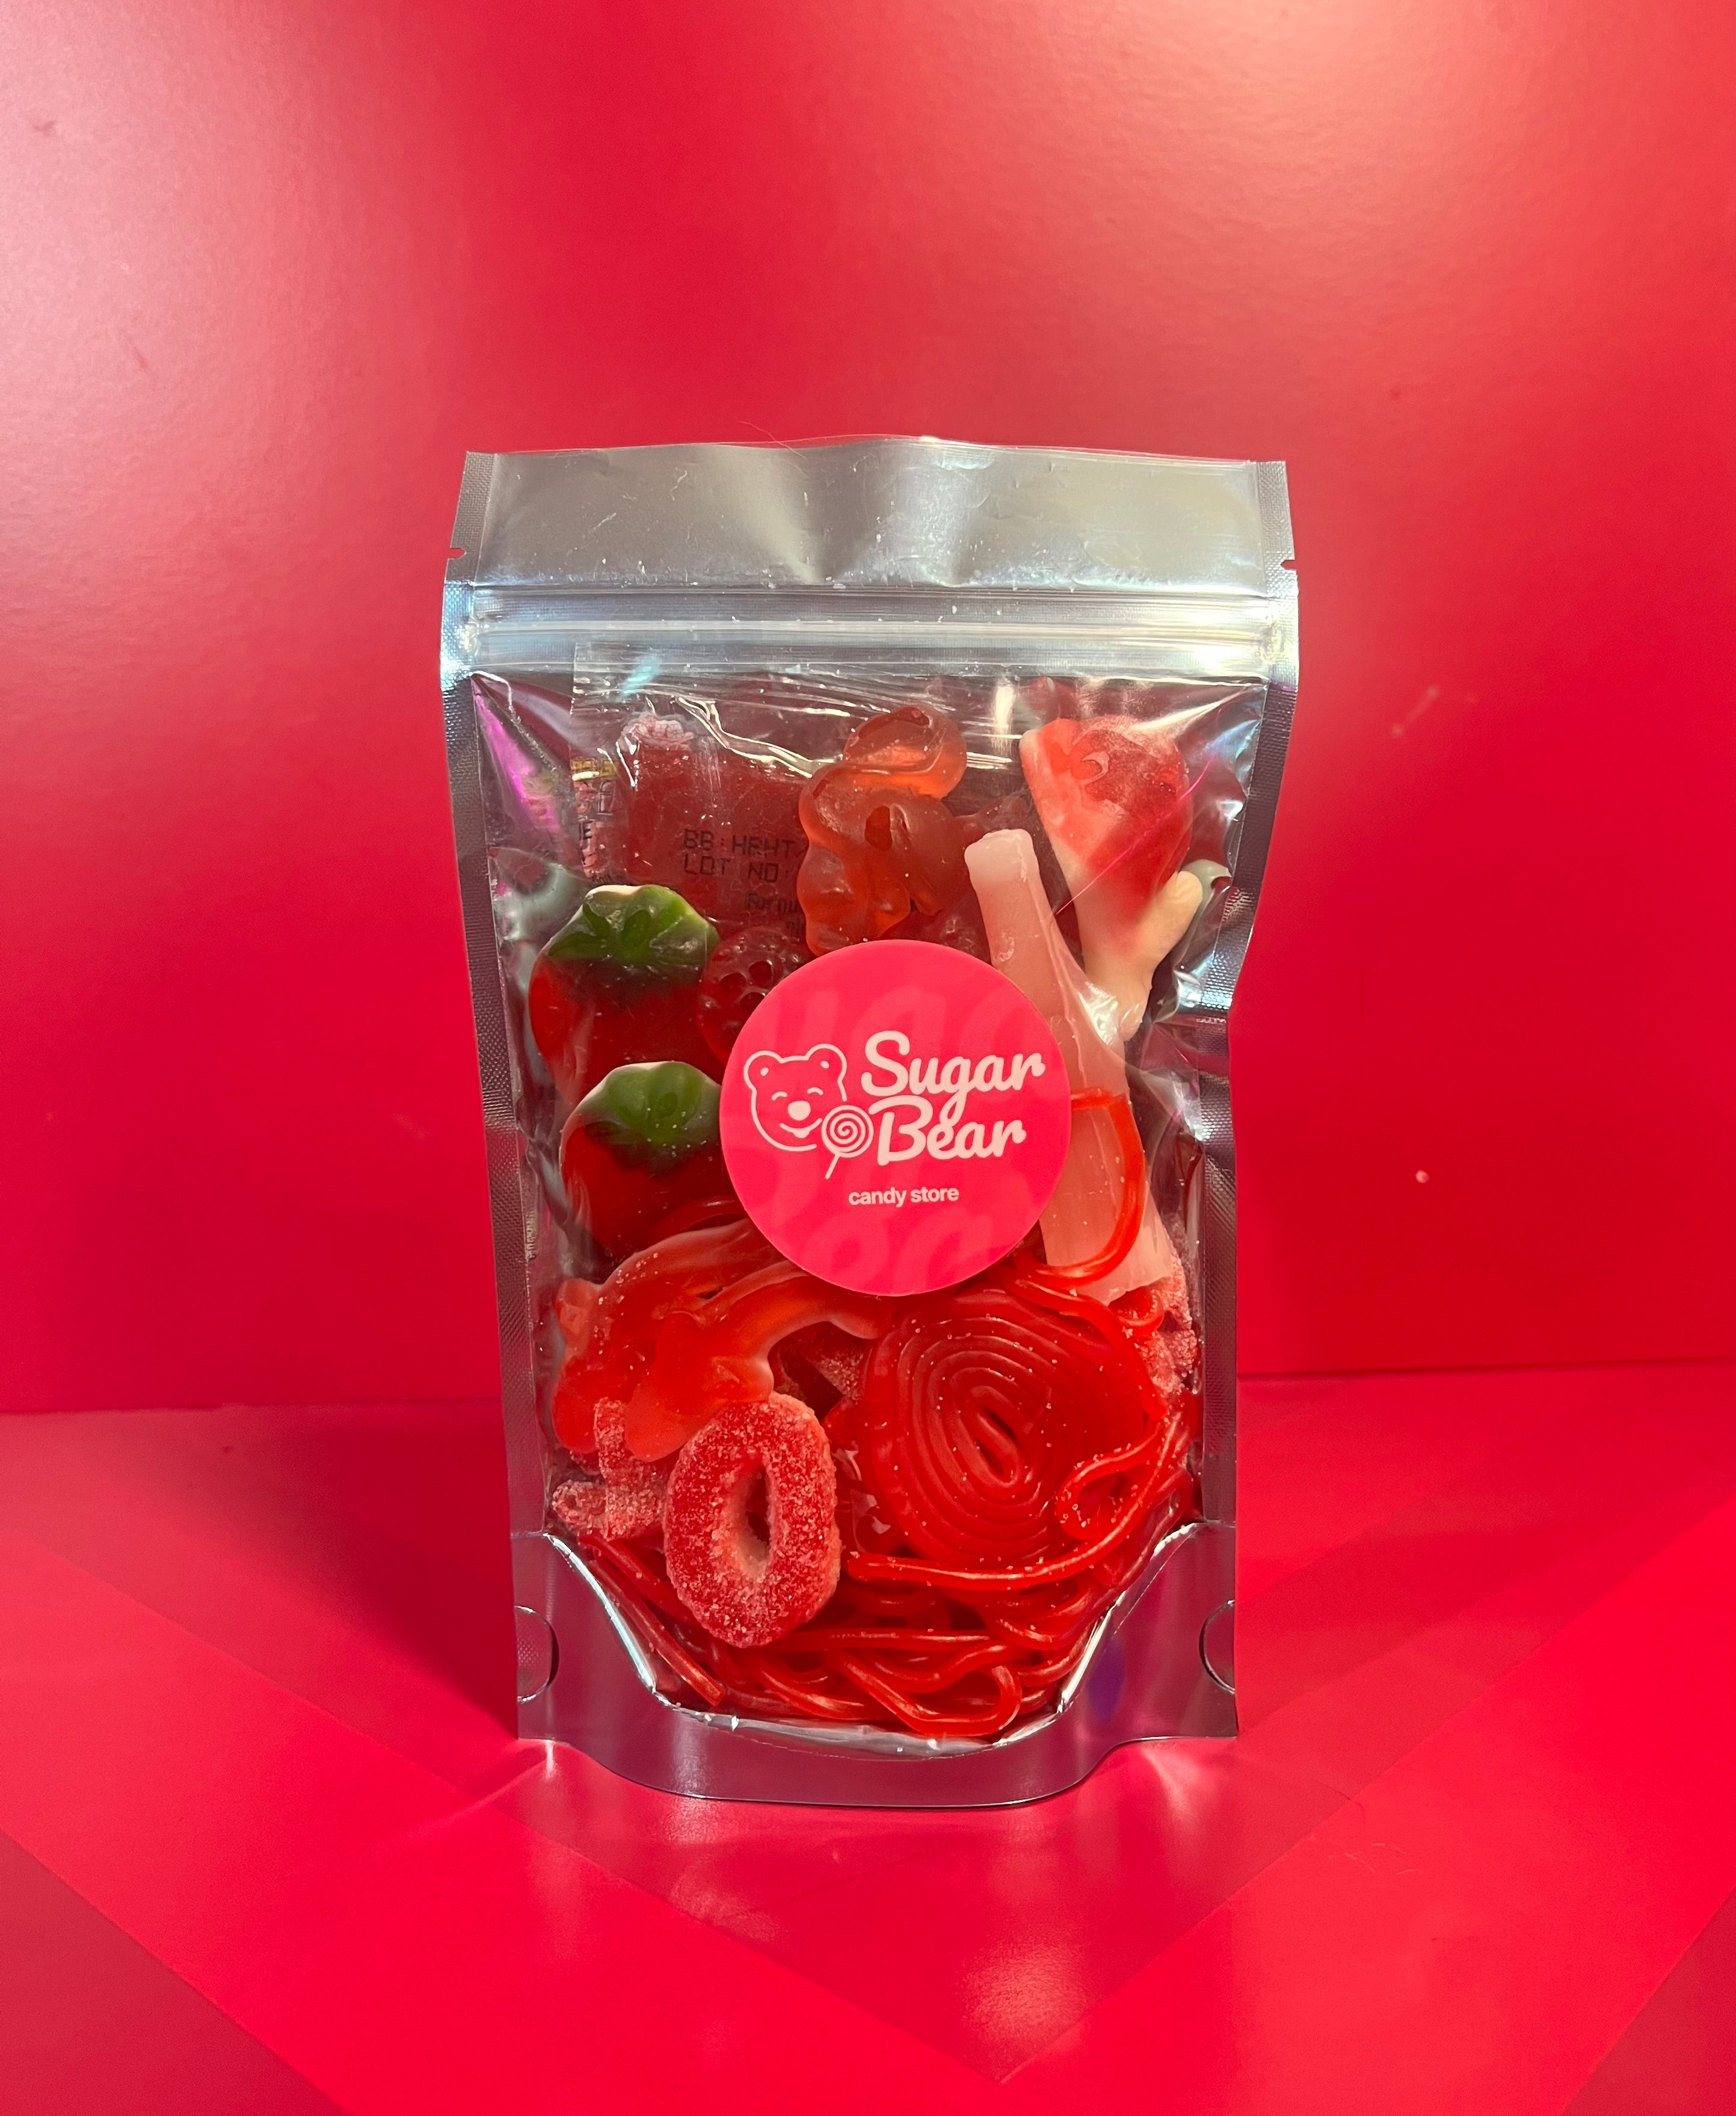 Bear Necessities: Organic Gummy Bears by MOUTH in Brooklyn, NY // Handmade  Candy